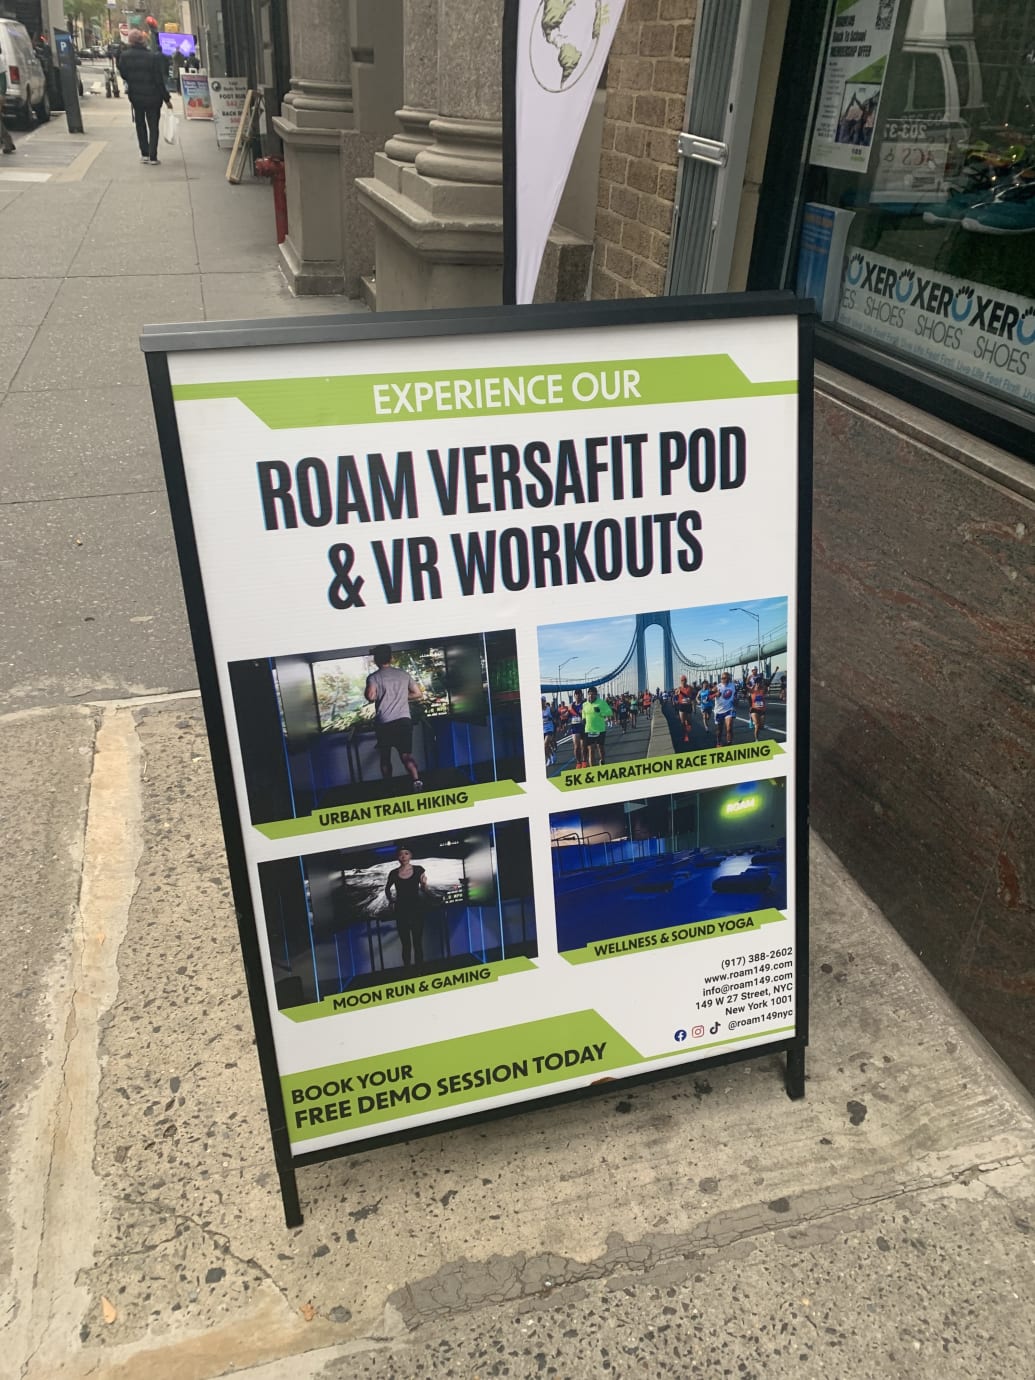 A sign outside Roam149 advertises pod and VR exercises in virtual environments including the lunar surface.